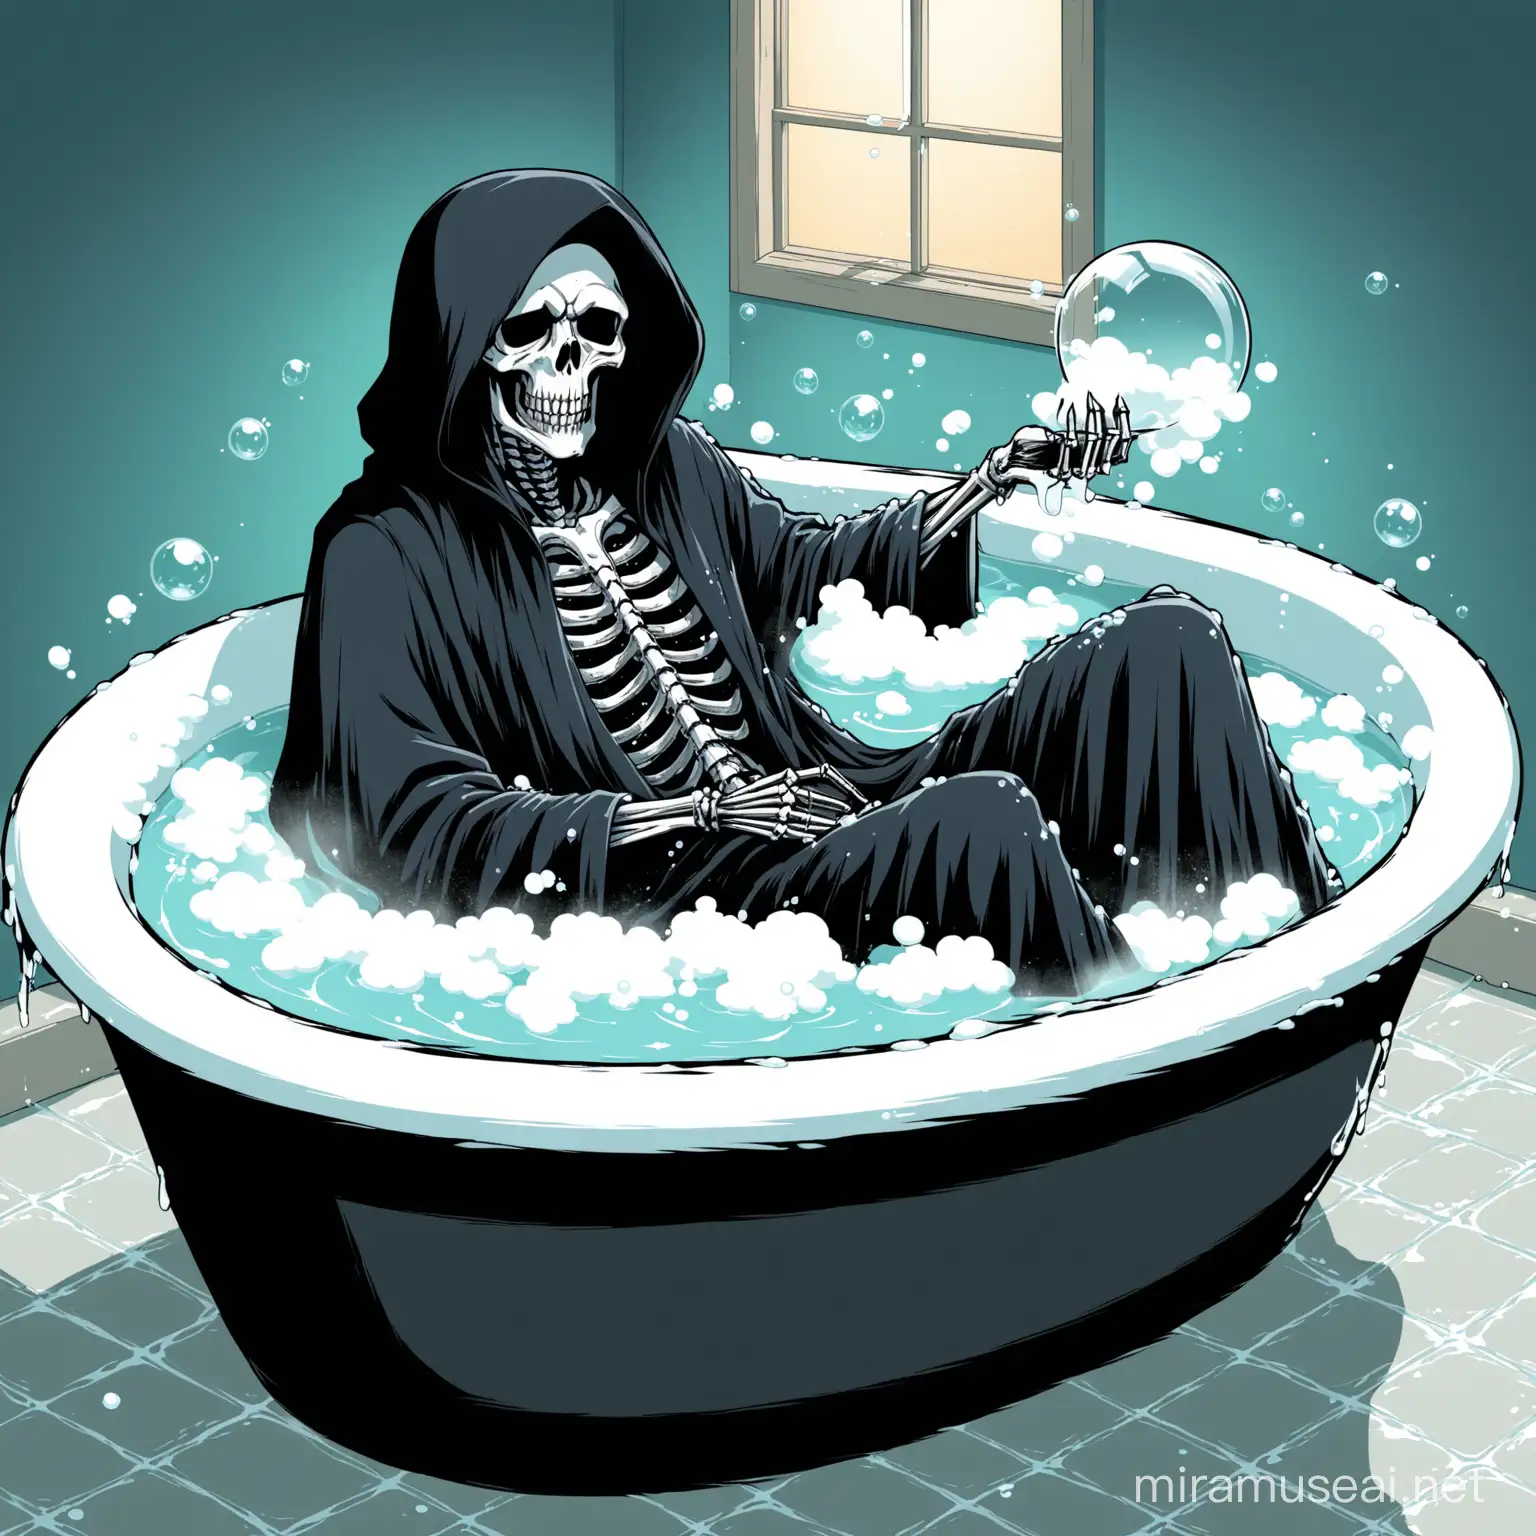 Grim Reaper Relaxing in Bubble Bath Tub with Overflowing Water